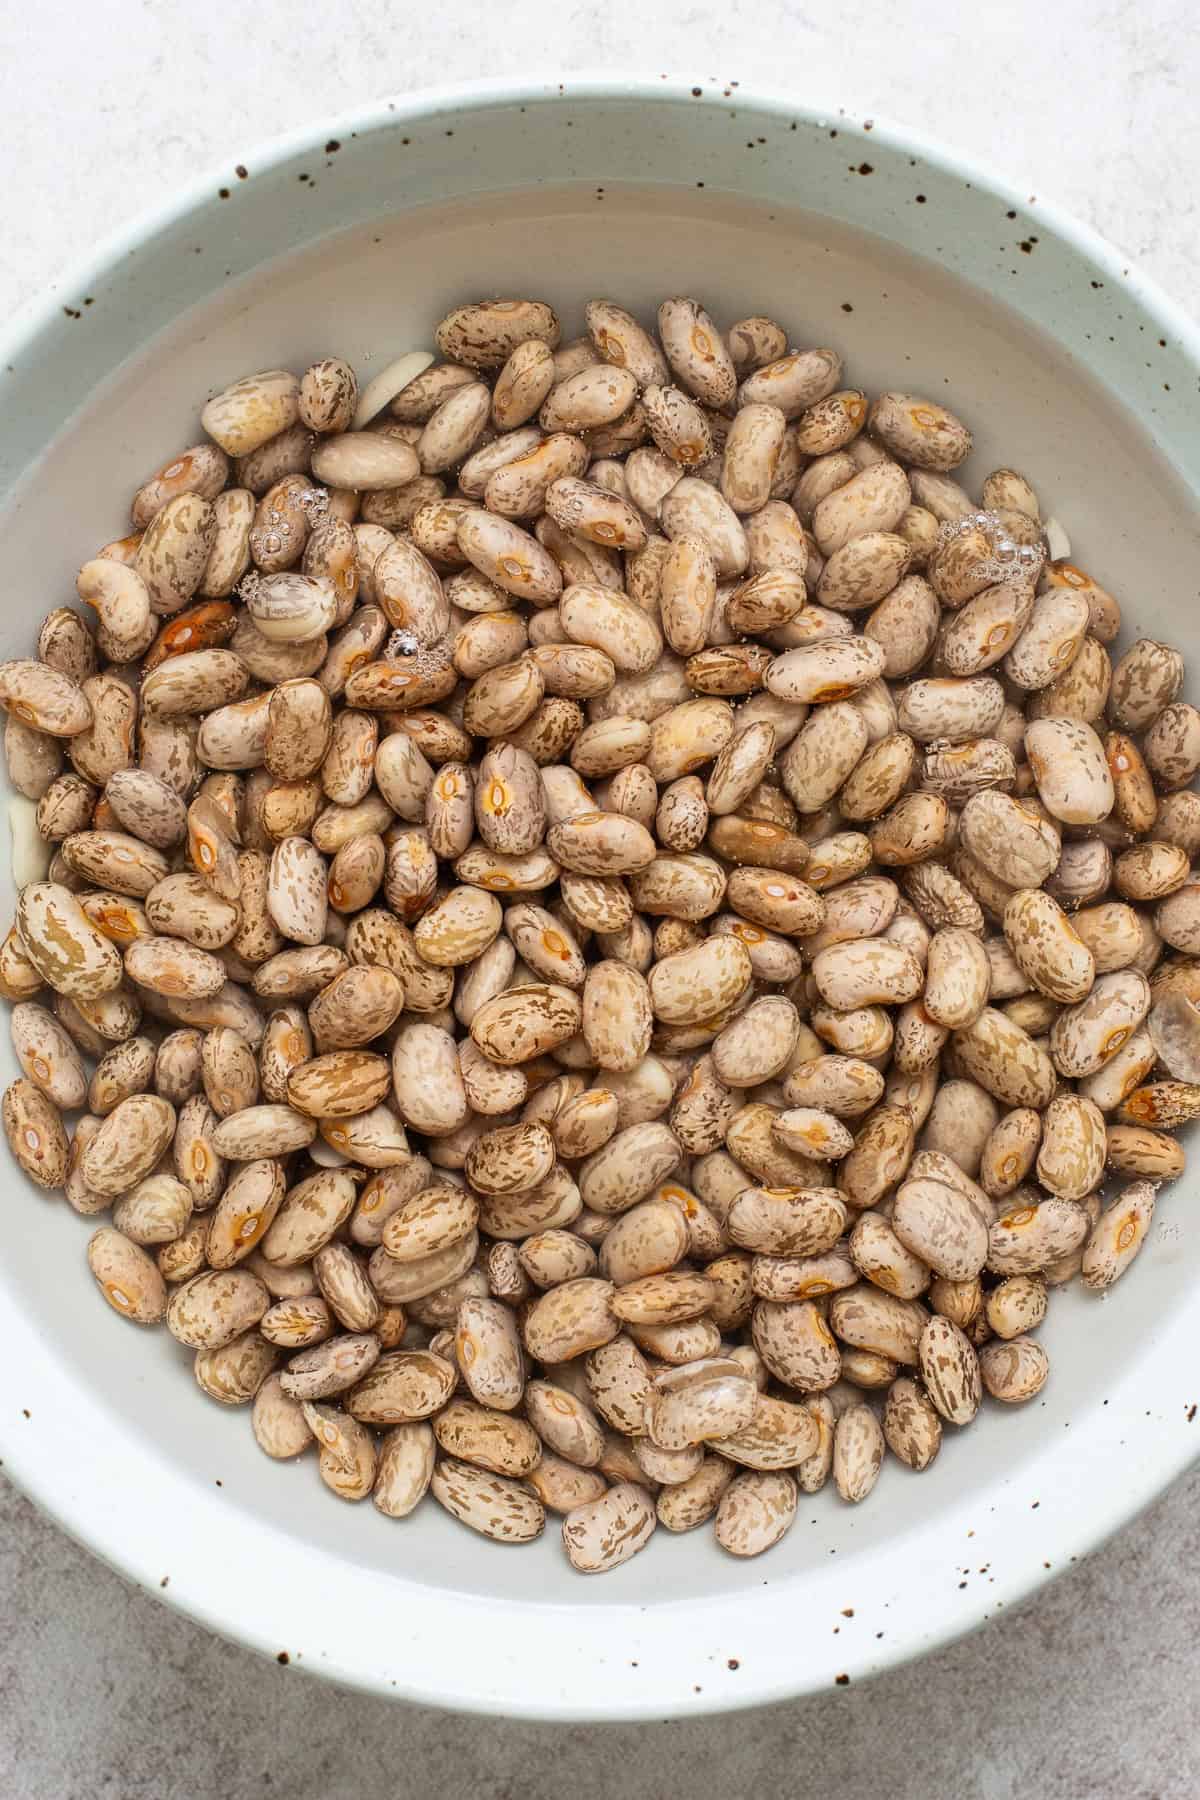 Pinto beans soaking in water